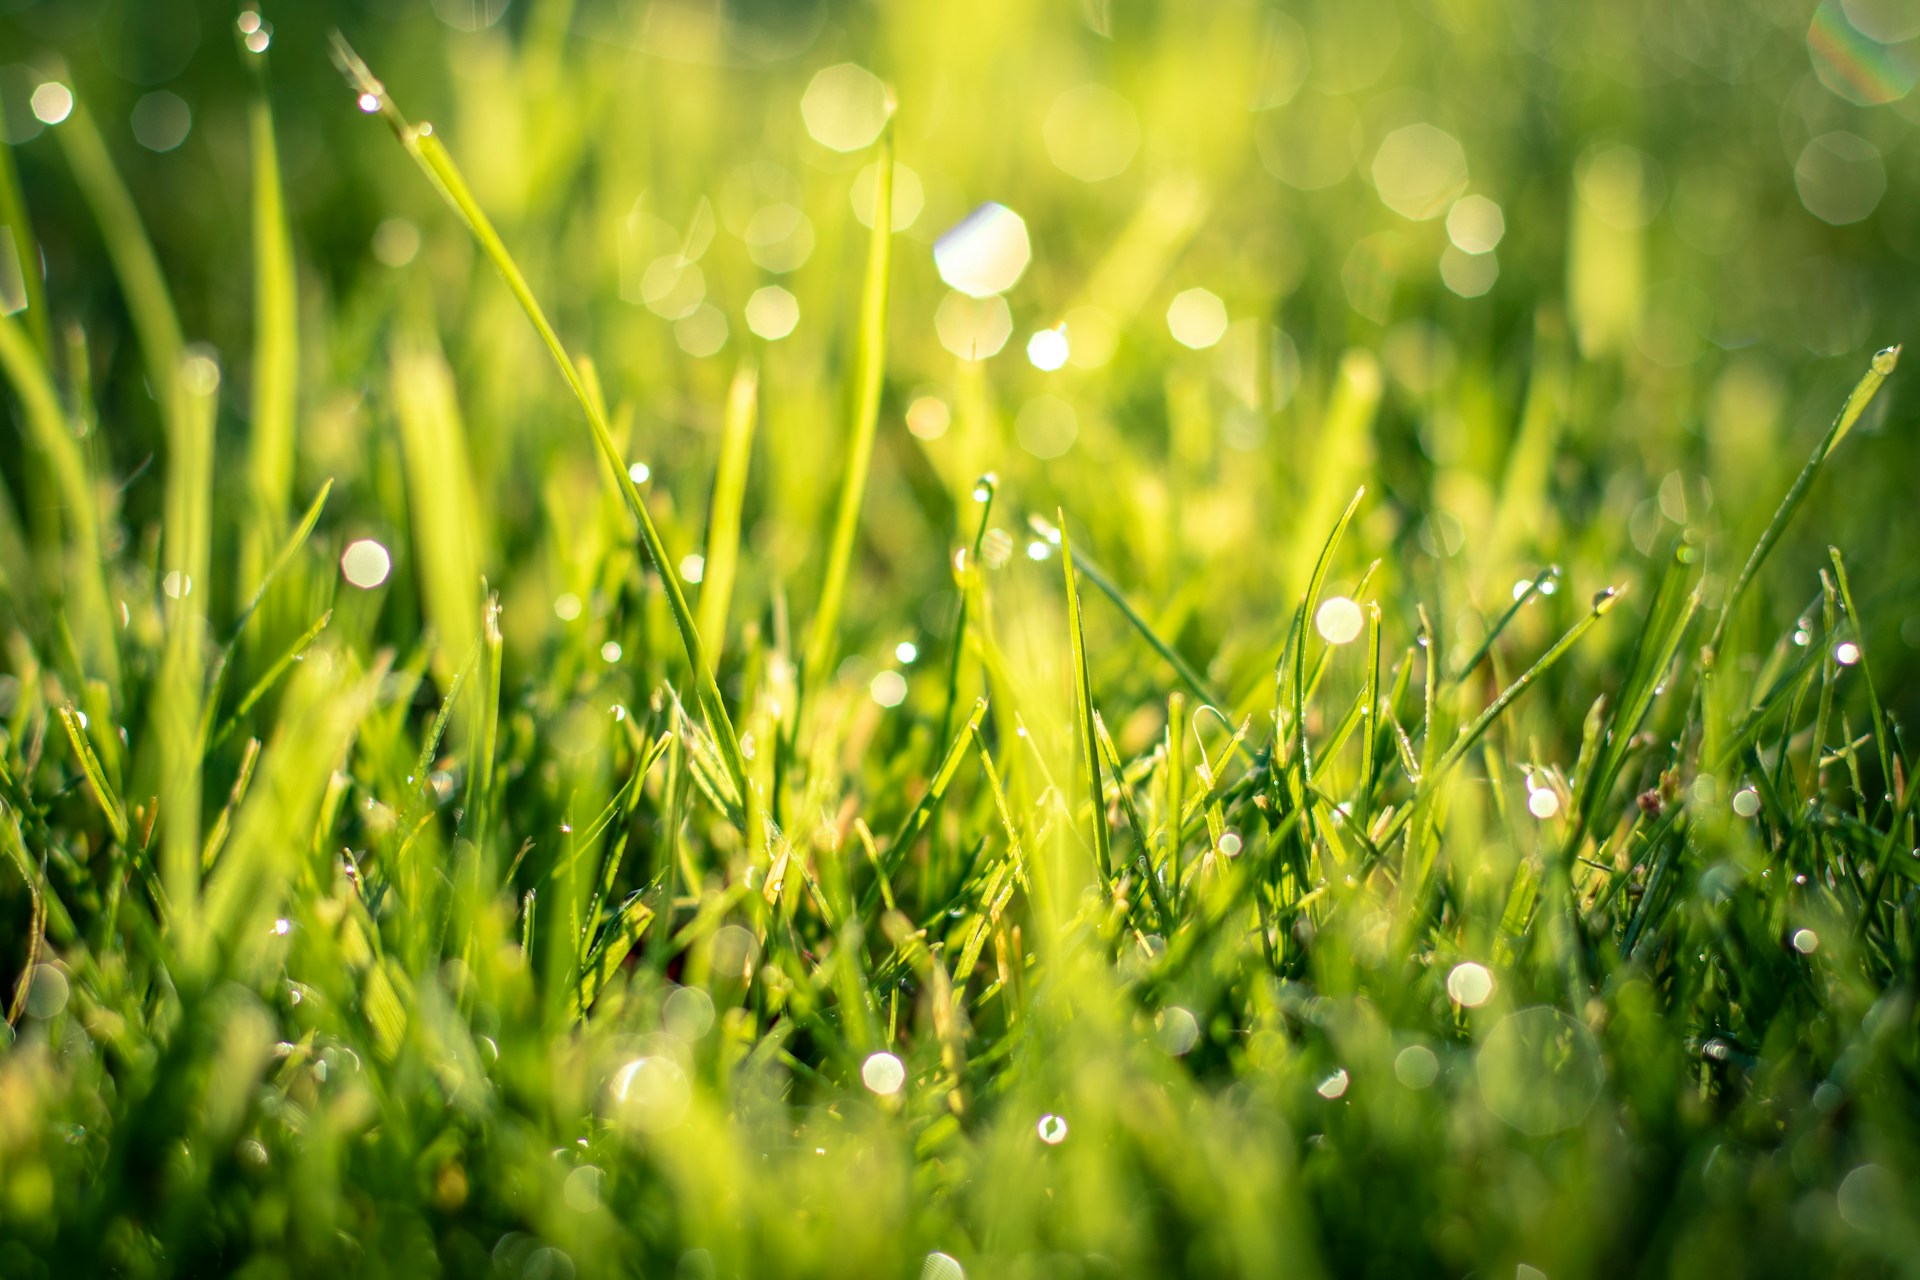 Sod vs. Seed: Choosing the Best Option for Your Lawn